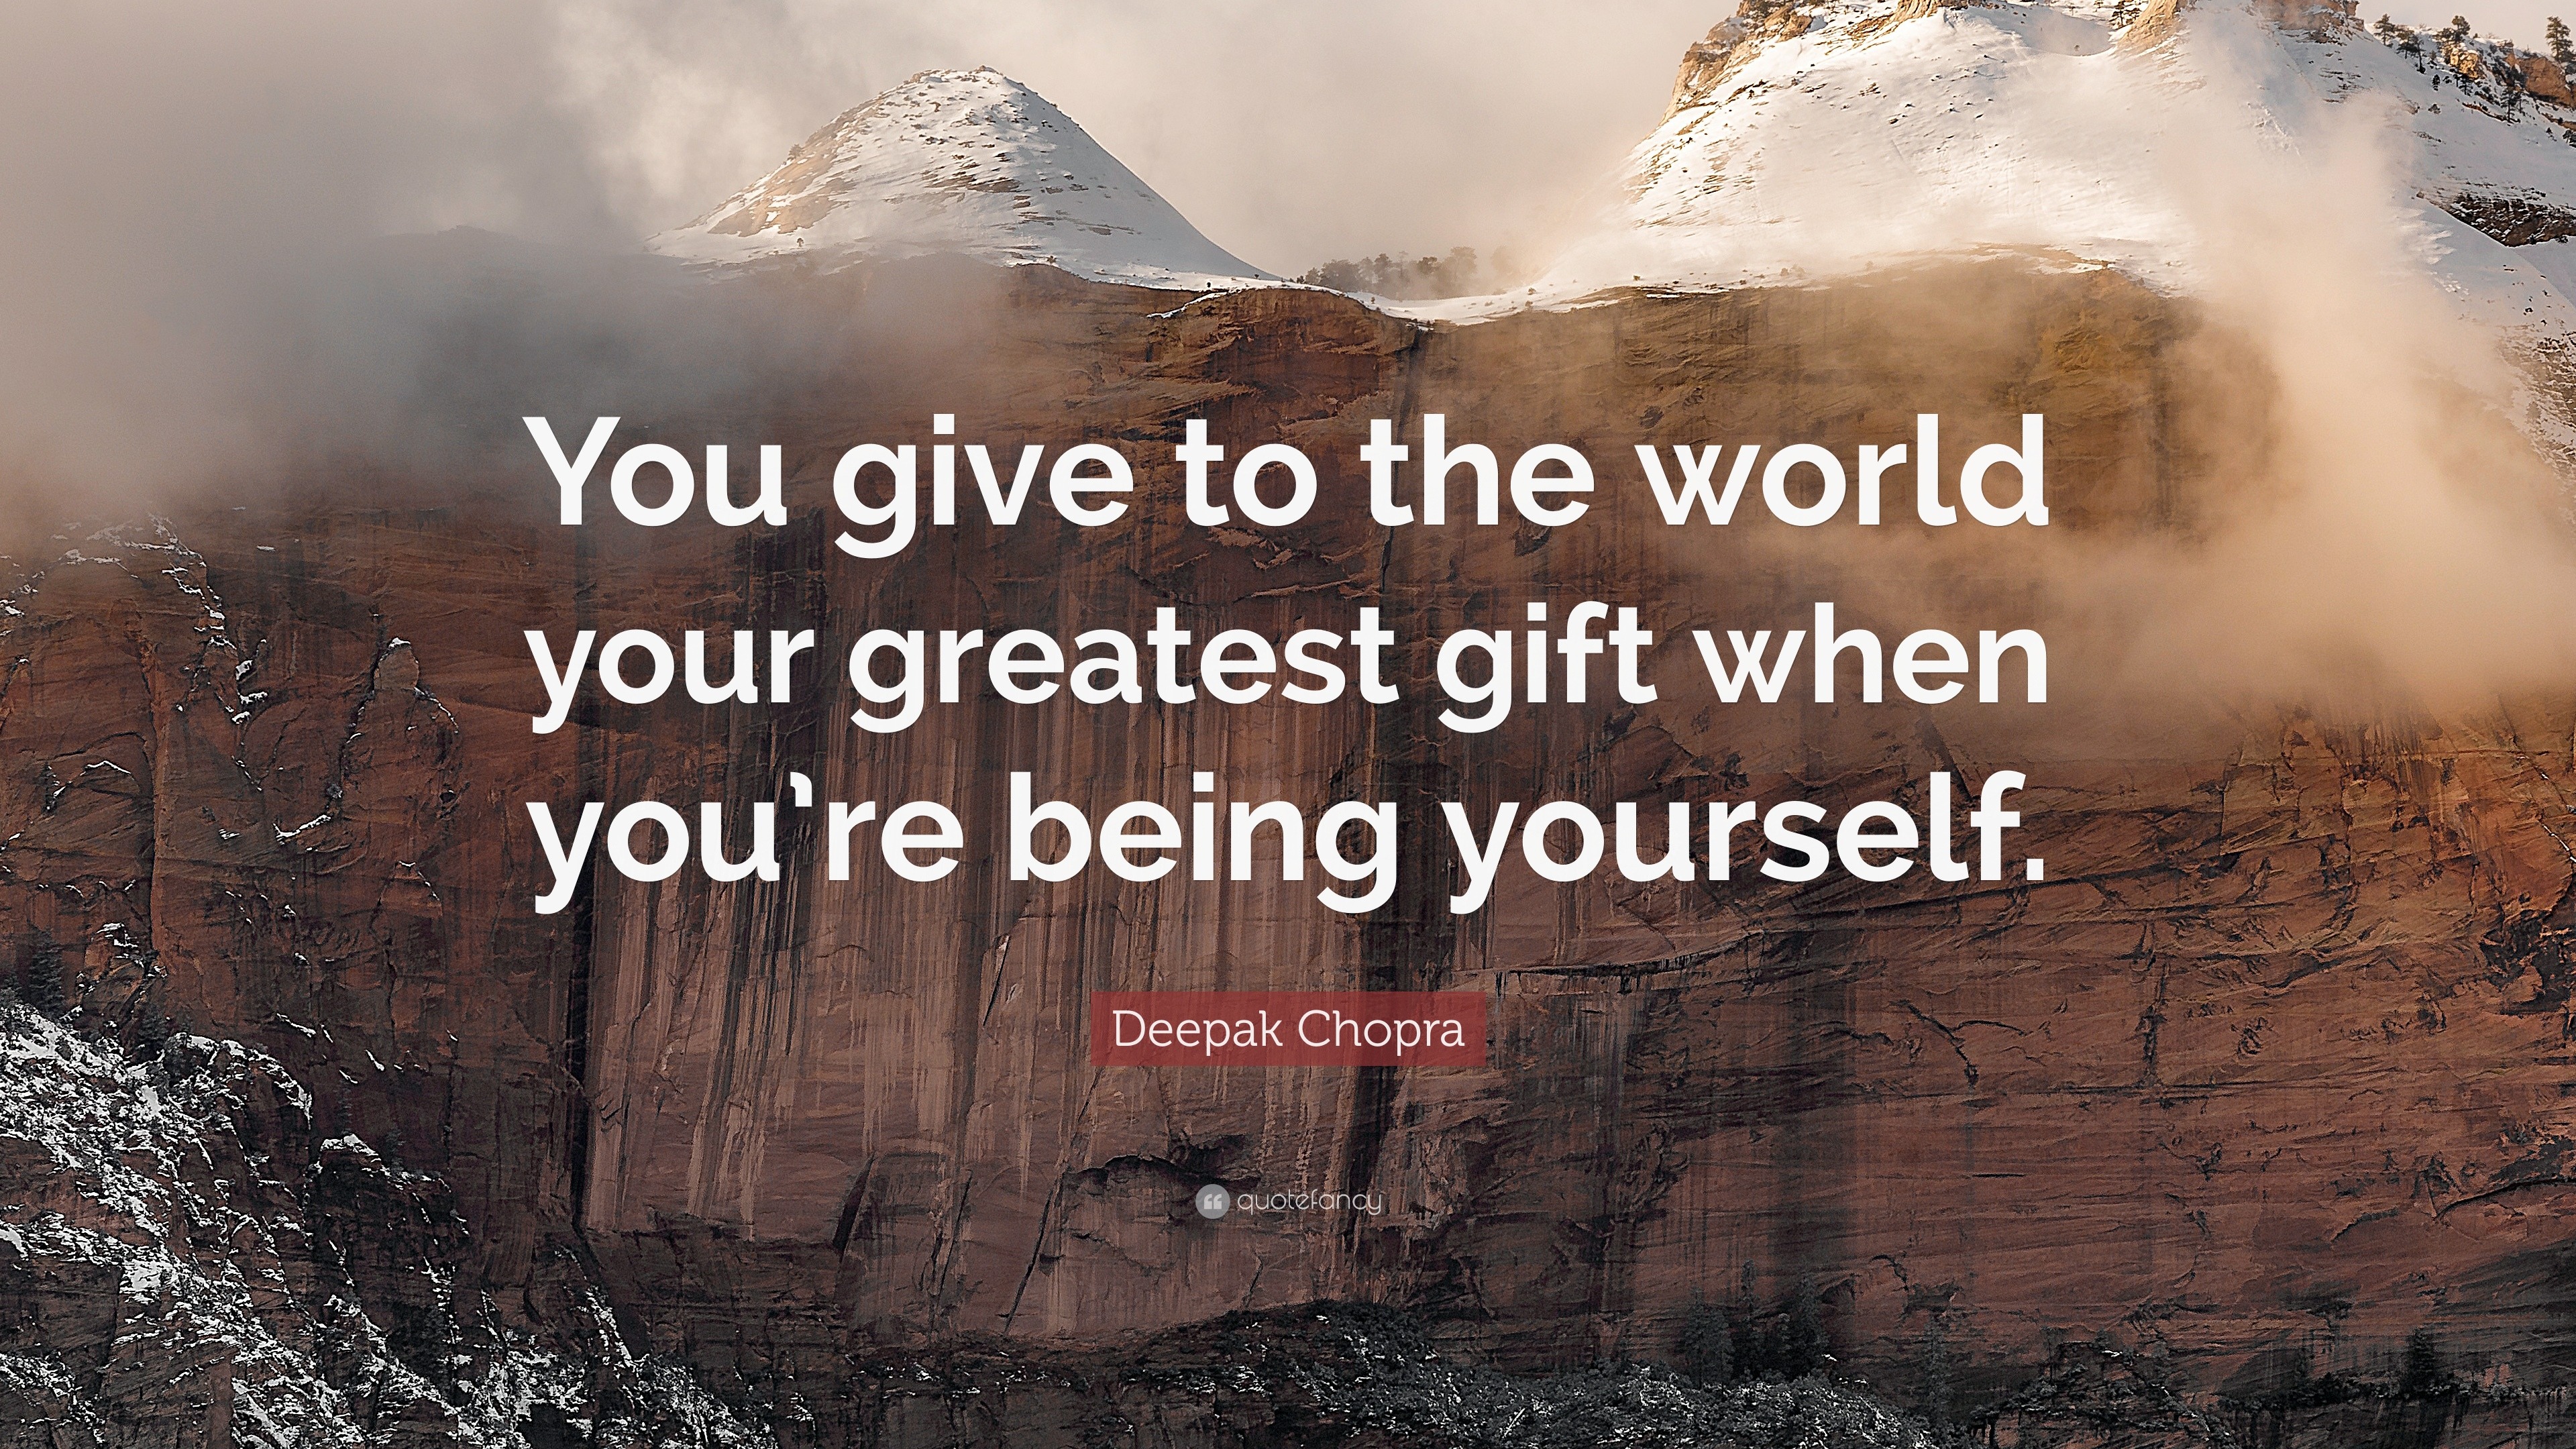 Deepak Chopra Quote You Give To The World Your Greatest Gift When You Re Being Yourself 10 Wallpapers Quotefancy